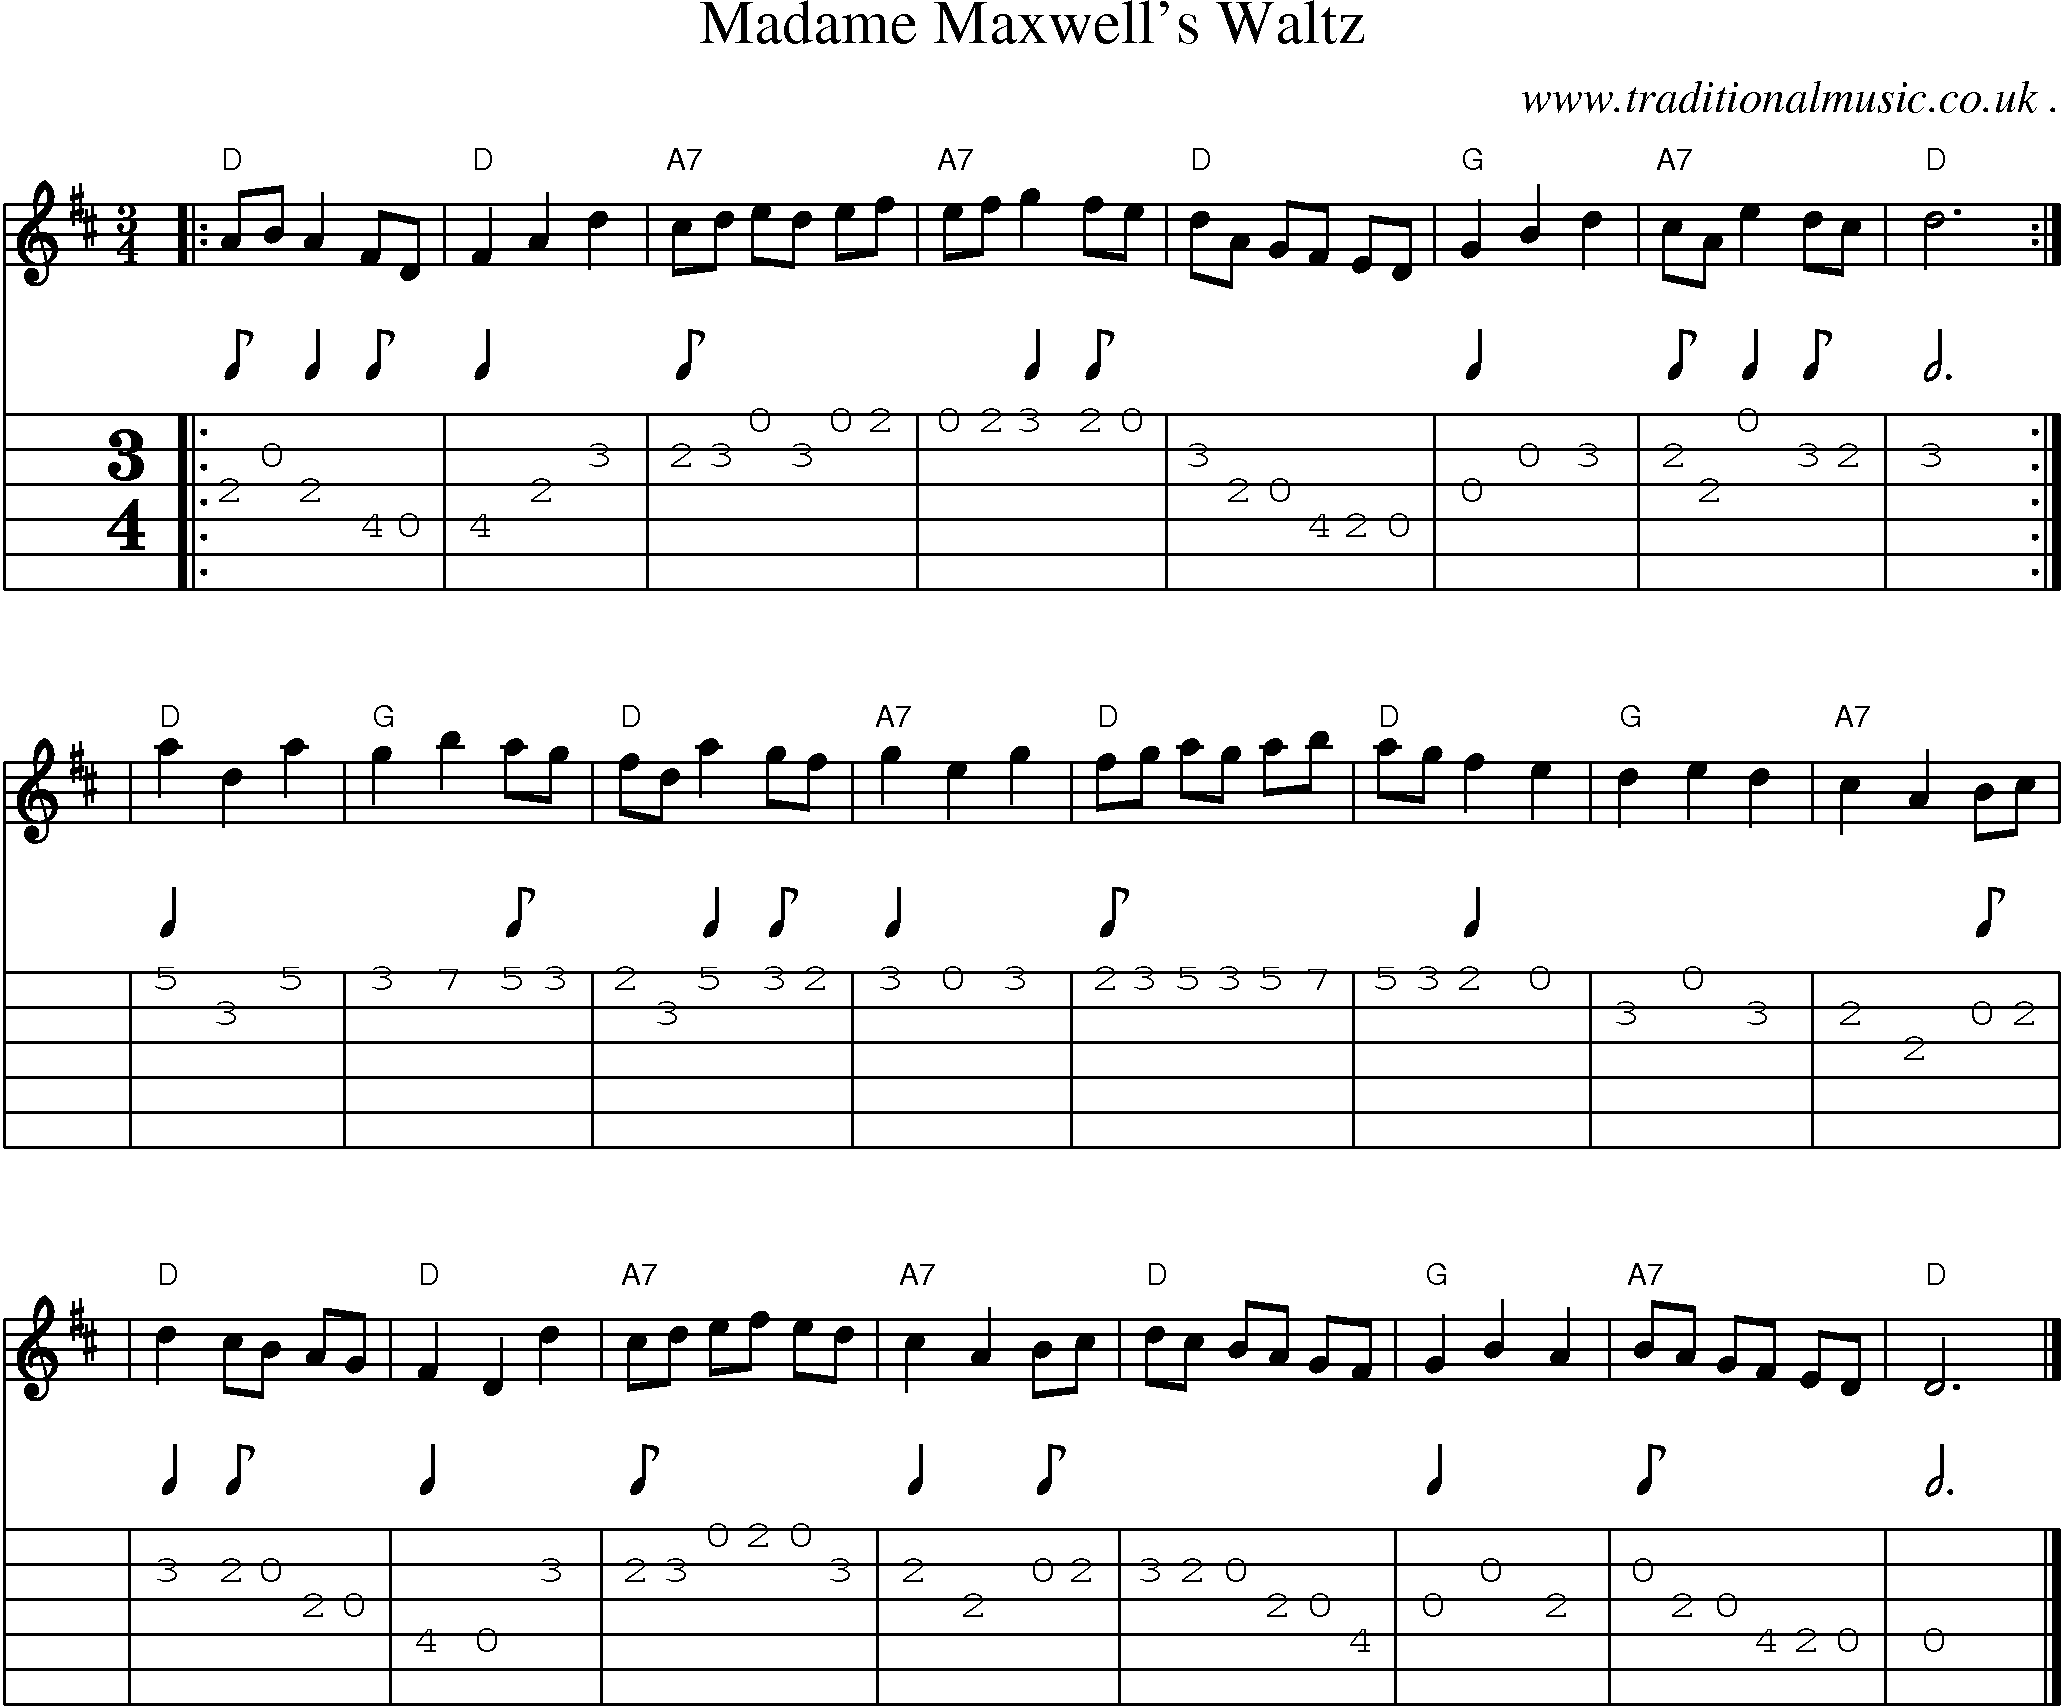 Sheet-music  score, Chords and Guitar Tabs for Madame Maxwells Waltz